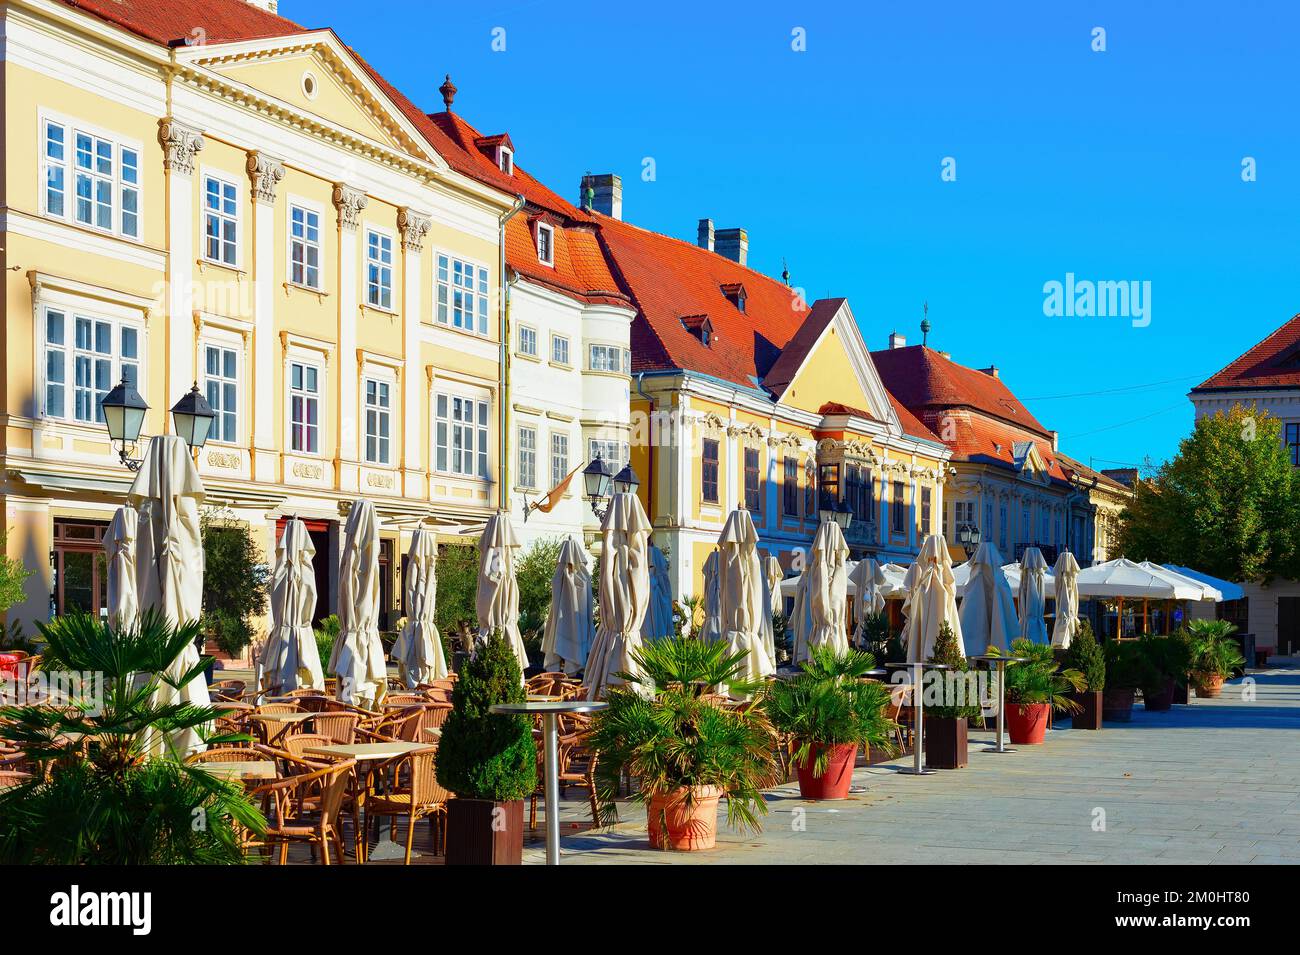 Morning old town view, street terraces of restaurants, green plants and historical architecture, Gyor, Hungary Stock Photo